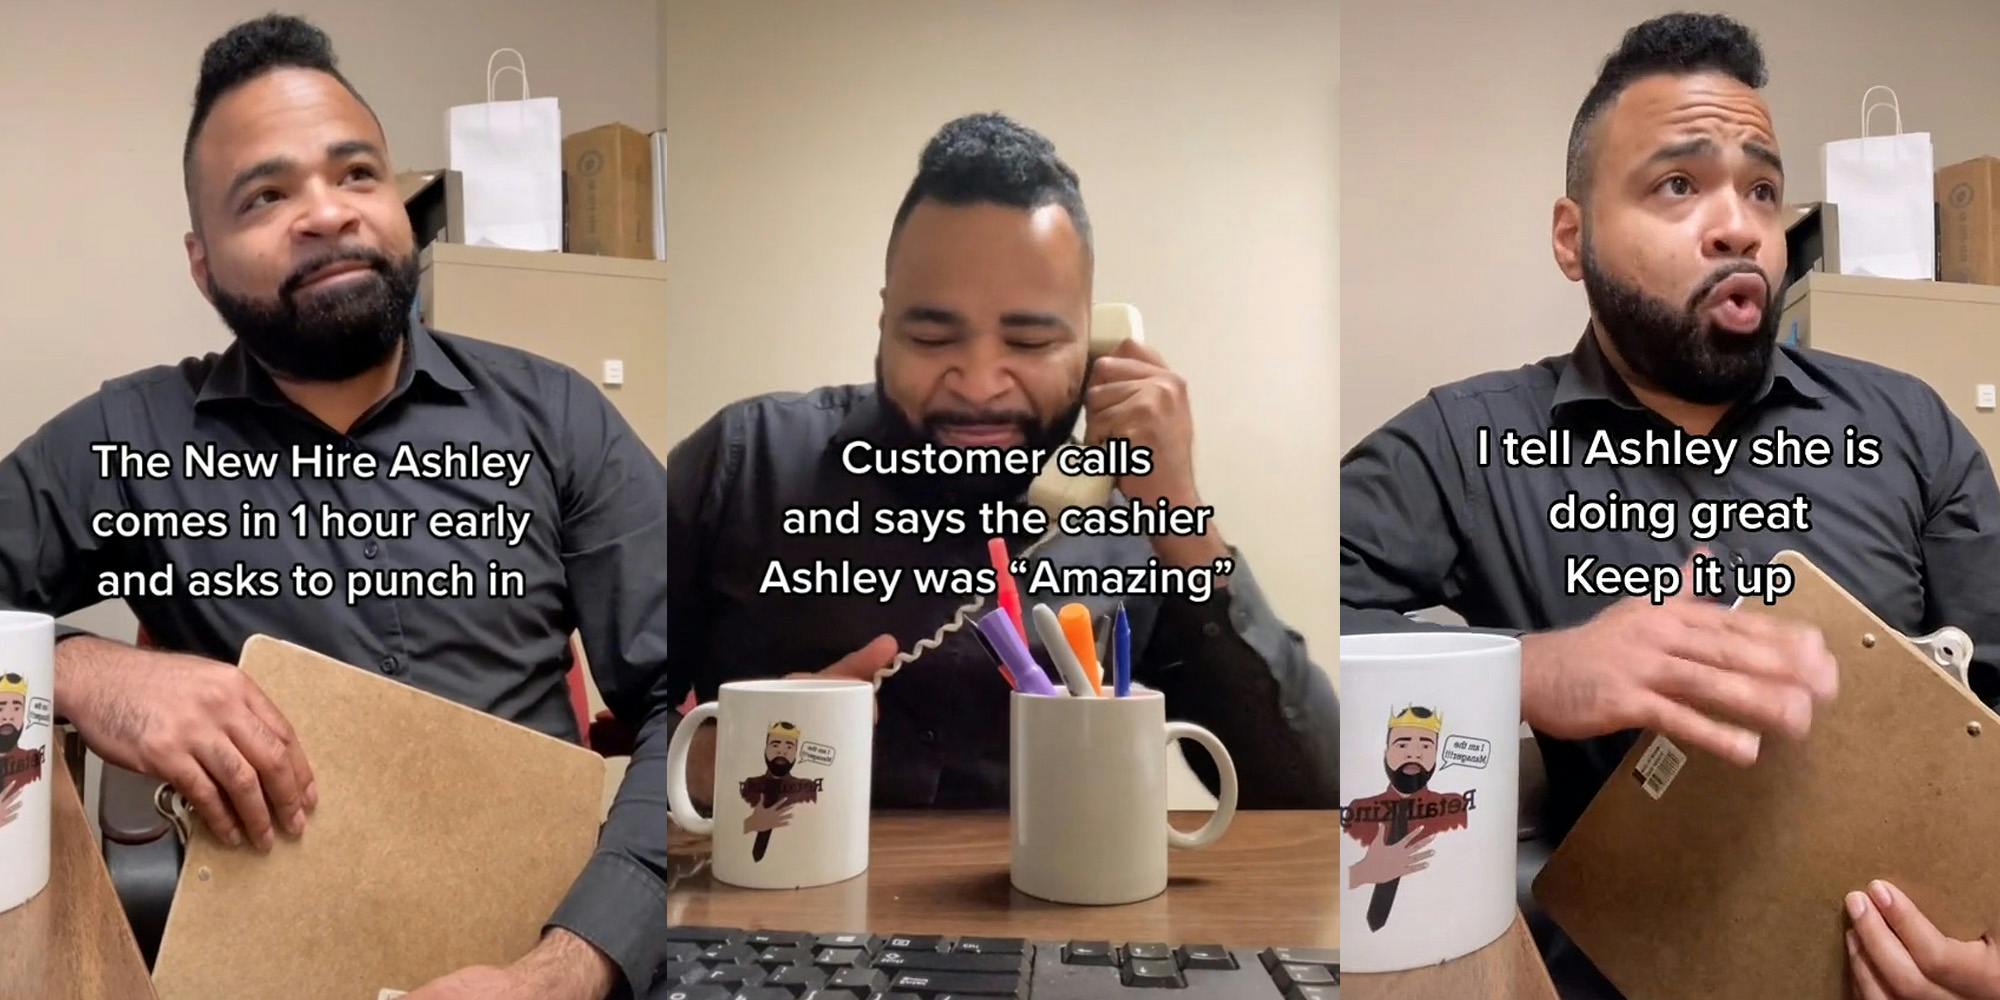 man sitting holding clipboard caption "The New Hire Ashley comes in 1 hour early and asks to punch in" (l) man holding phone up to ear while sitting at table with keyboard caption "Customer calls and says the cashier Ashley was "Amazing"" (c) man holding clipboard caption "I tell Ashley she is doing great Keep it up" (r)